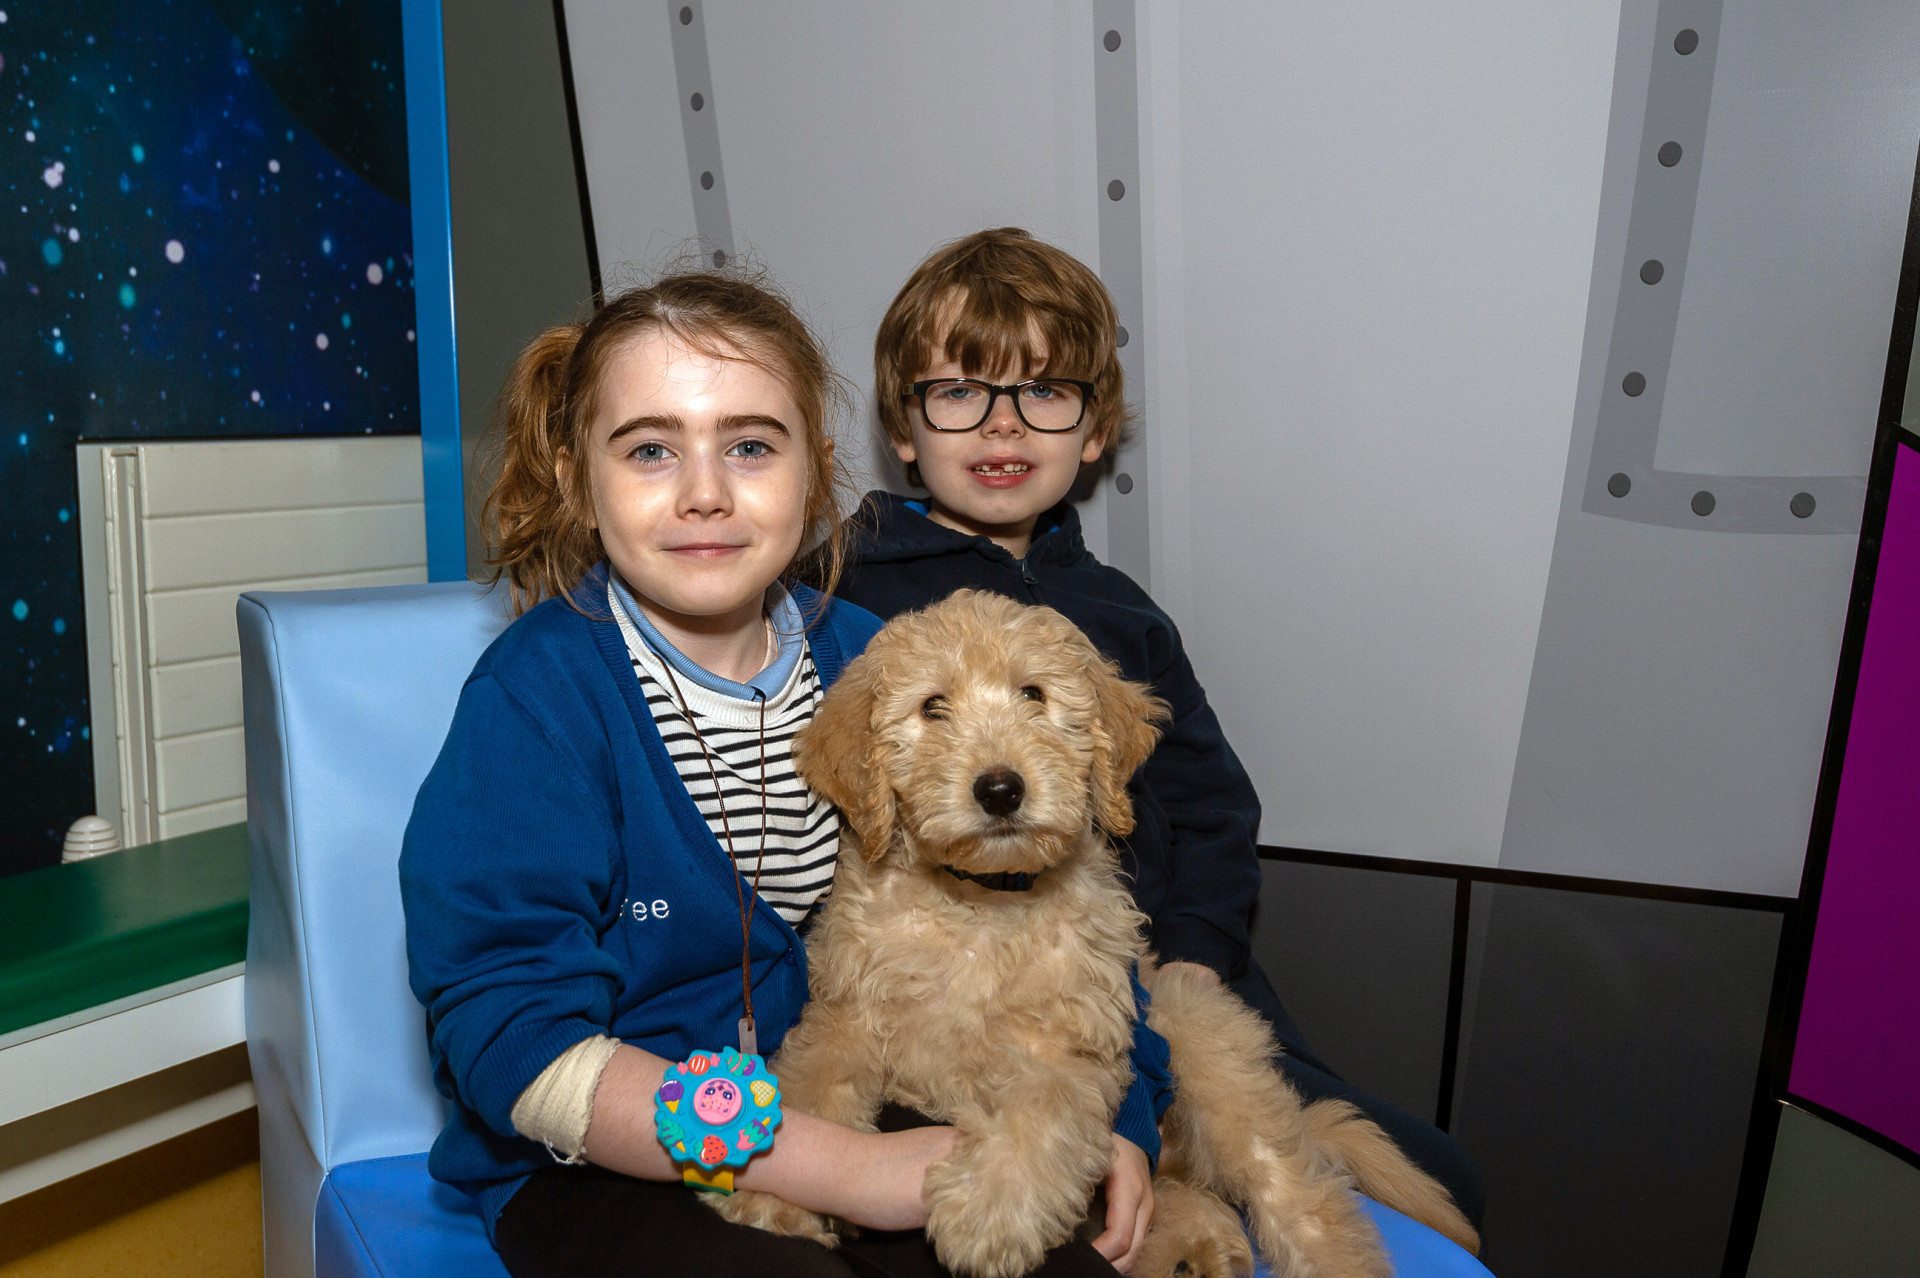 School launches fundraiser to train Póga the assistance dog